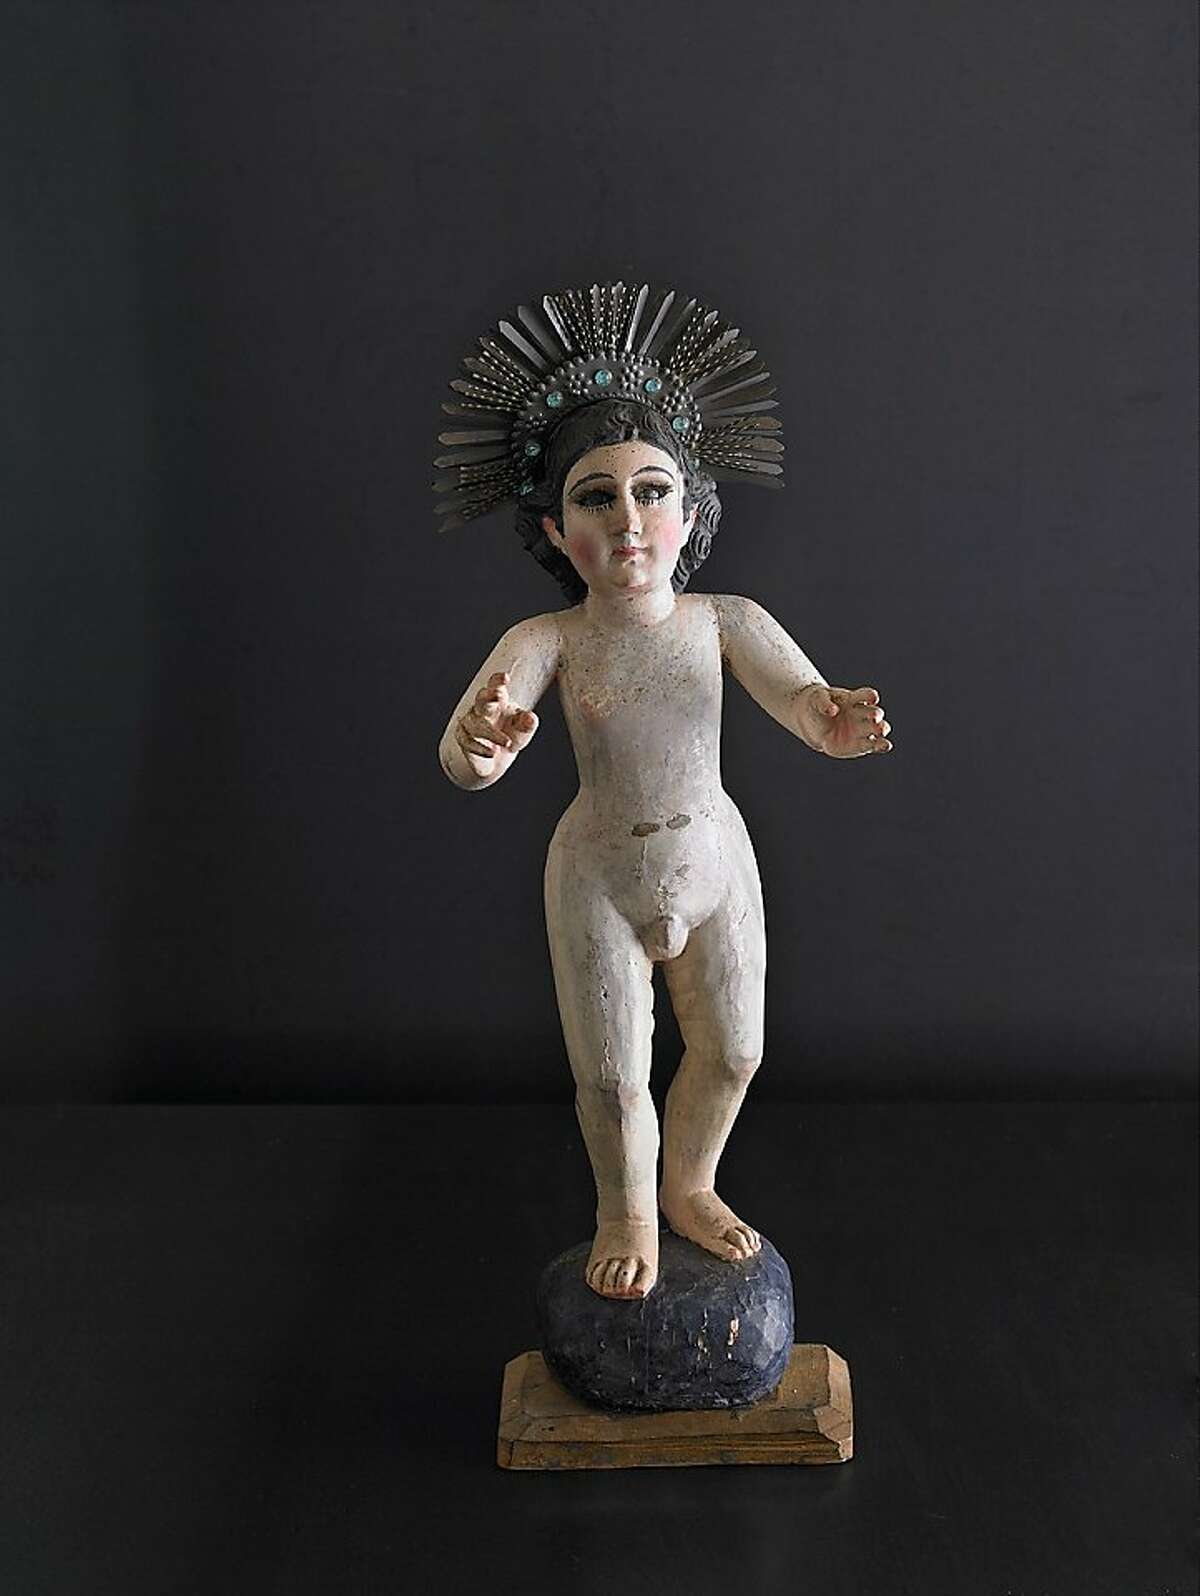 Items from the collection that Rex May donated to the Mexican Museum are part of a show opening Friday.